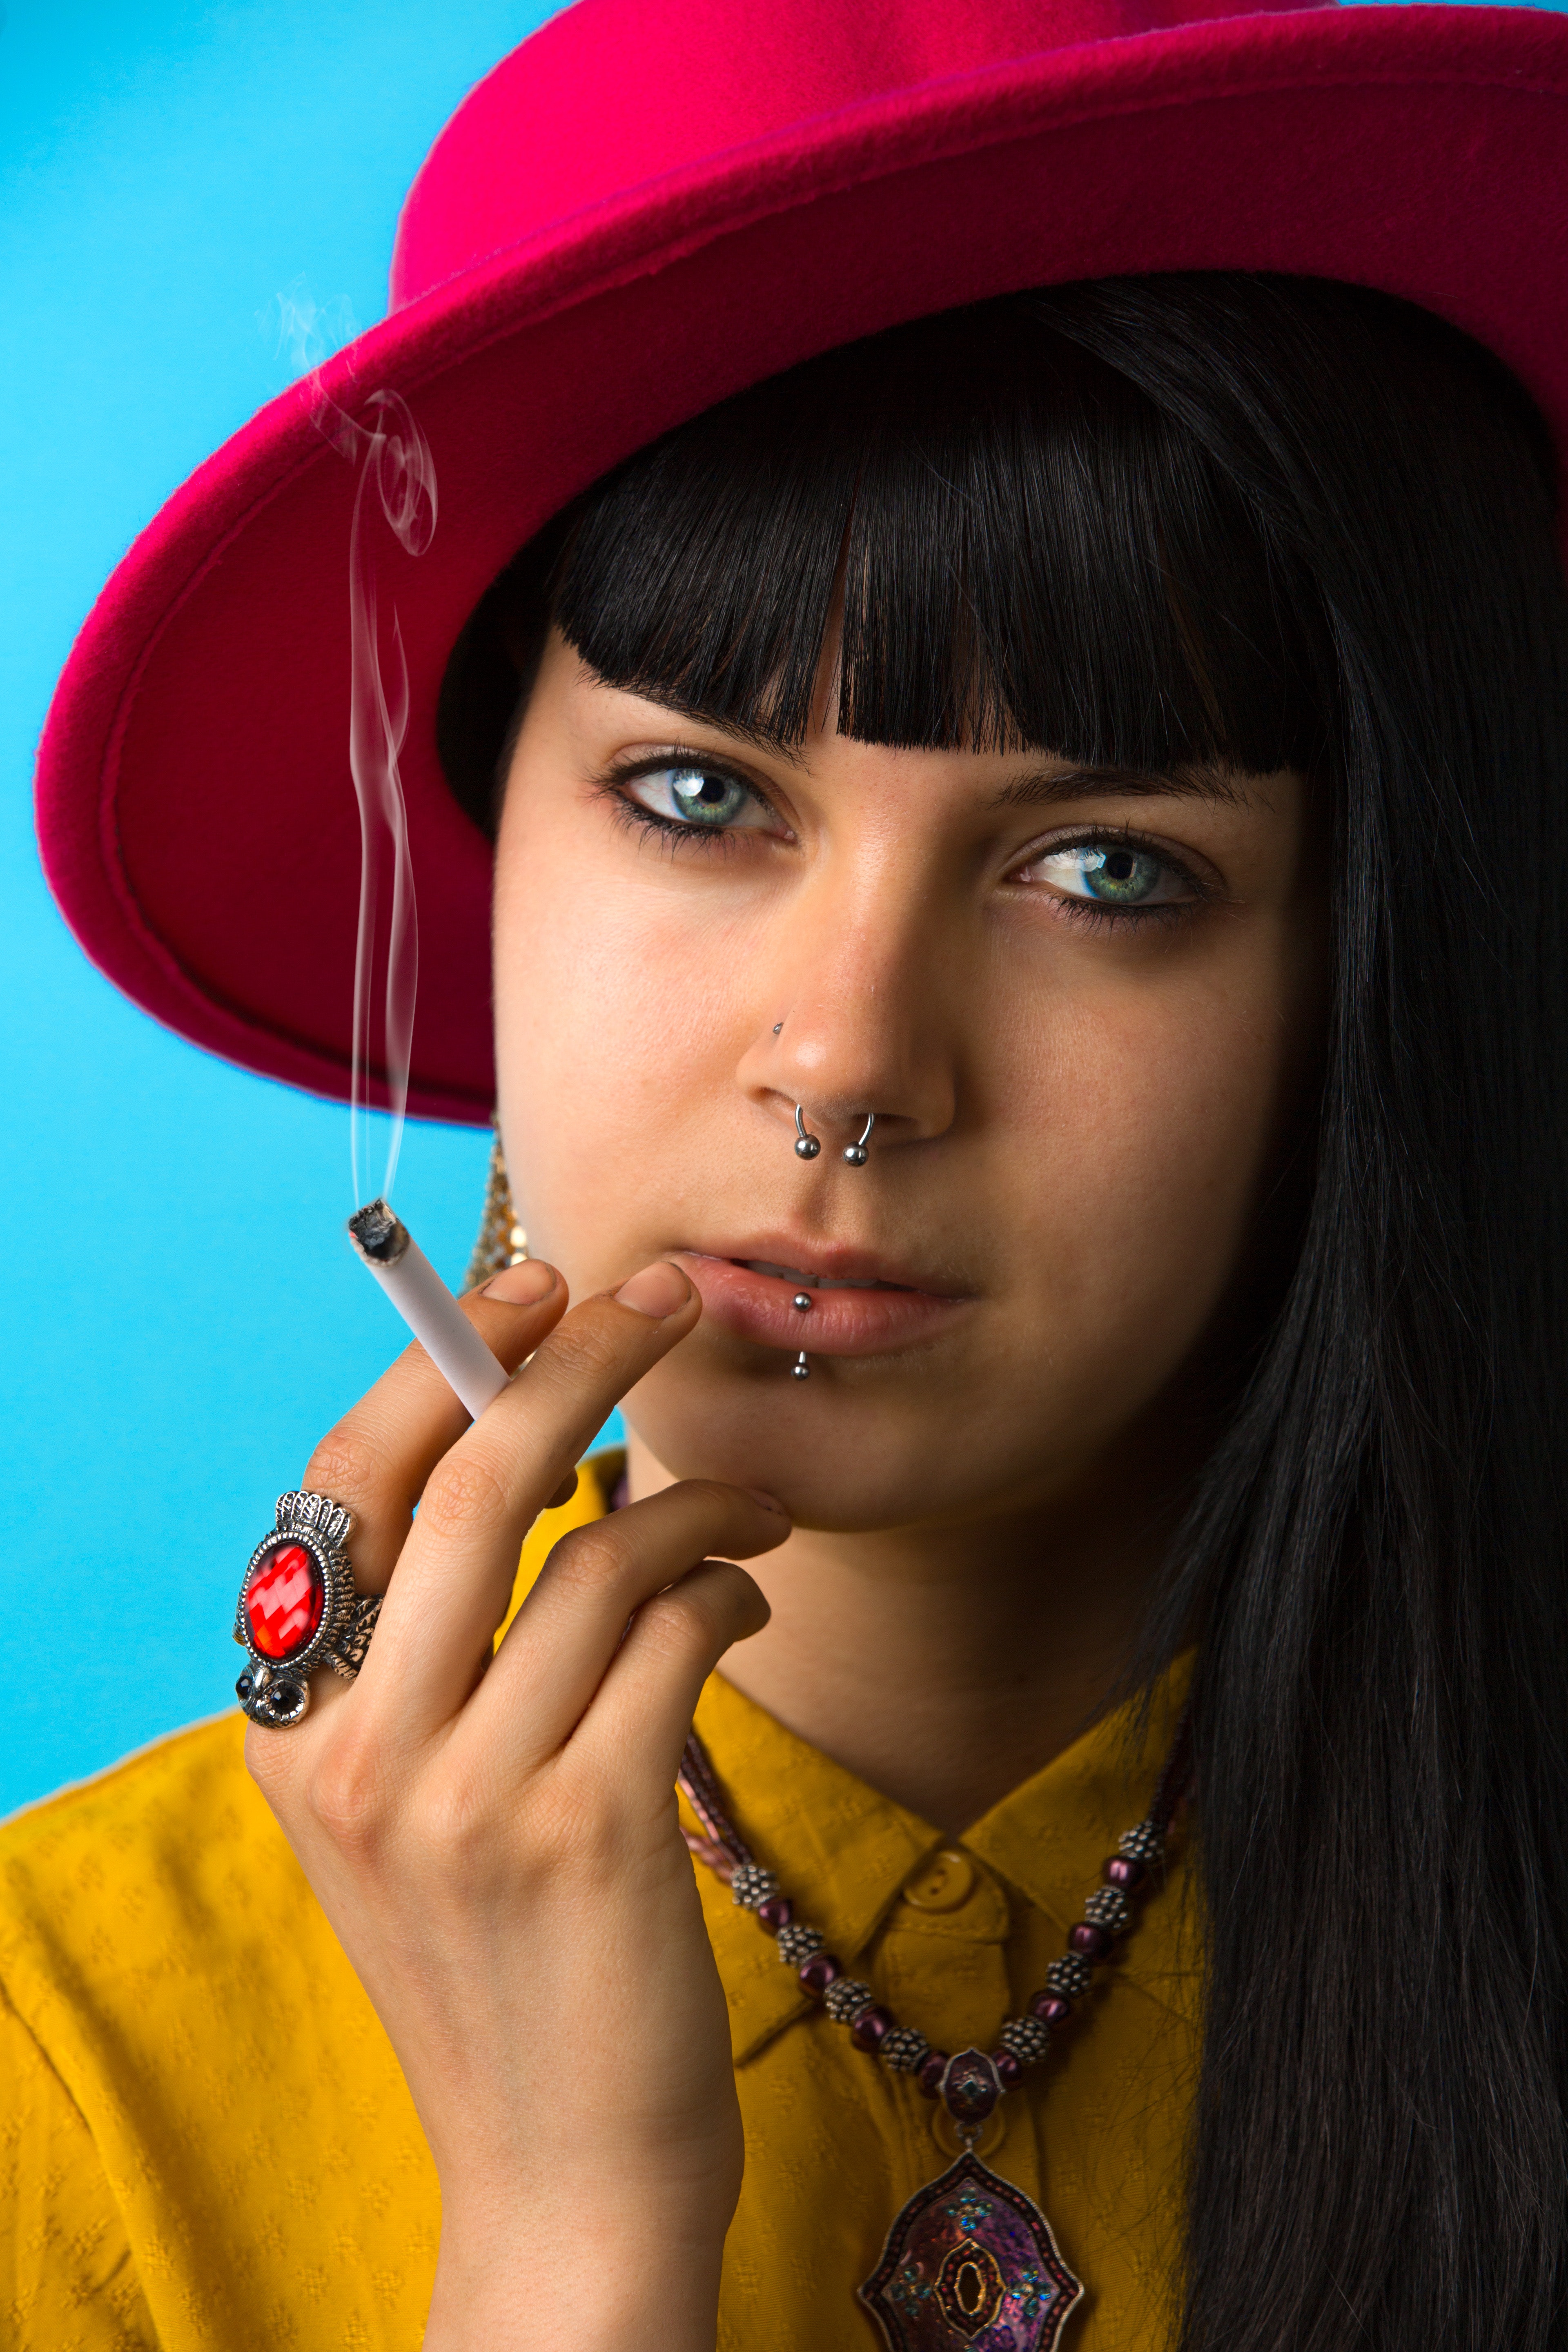 A woman holding a cigarette stick wearing a red hat and a yellow shirt